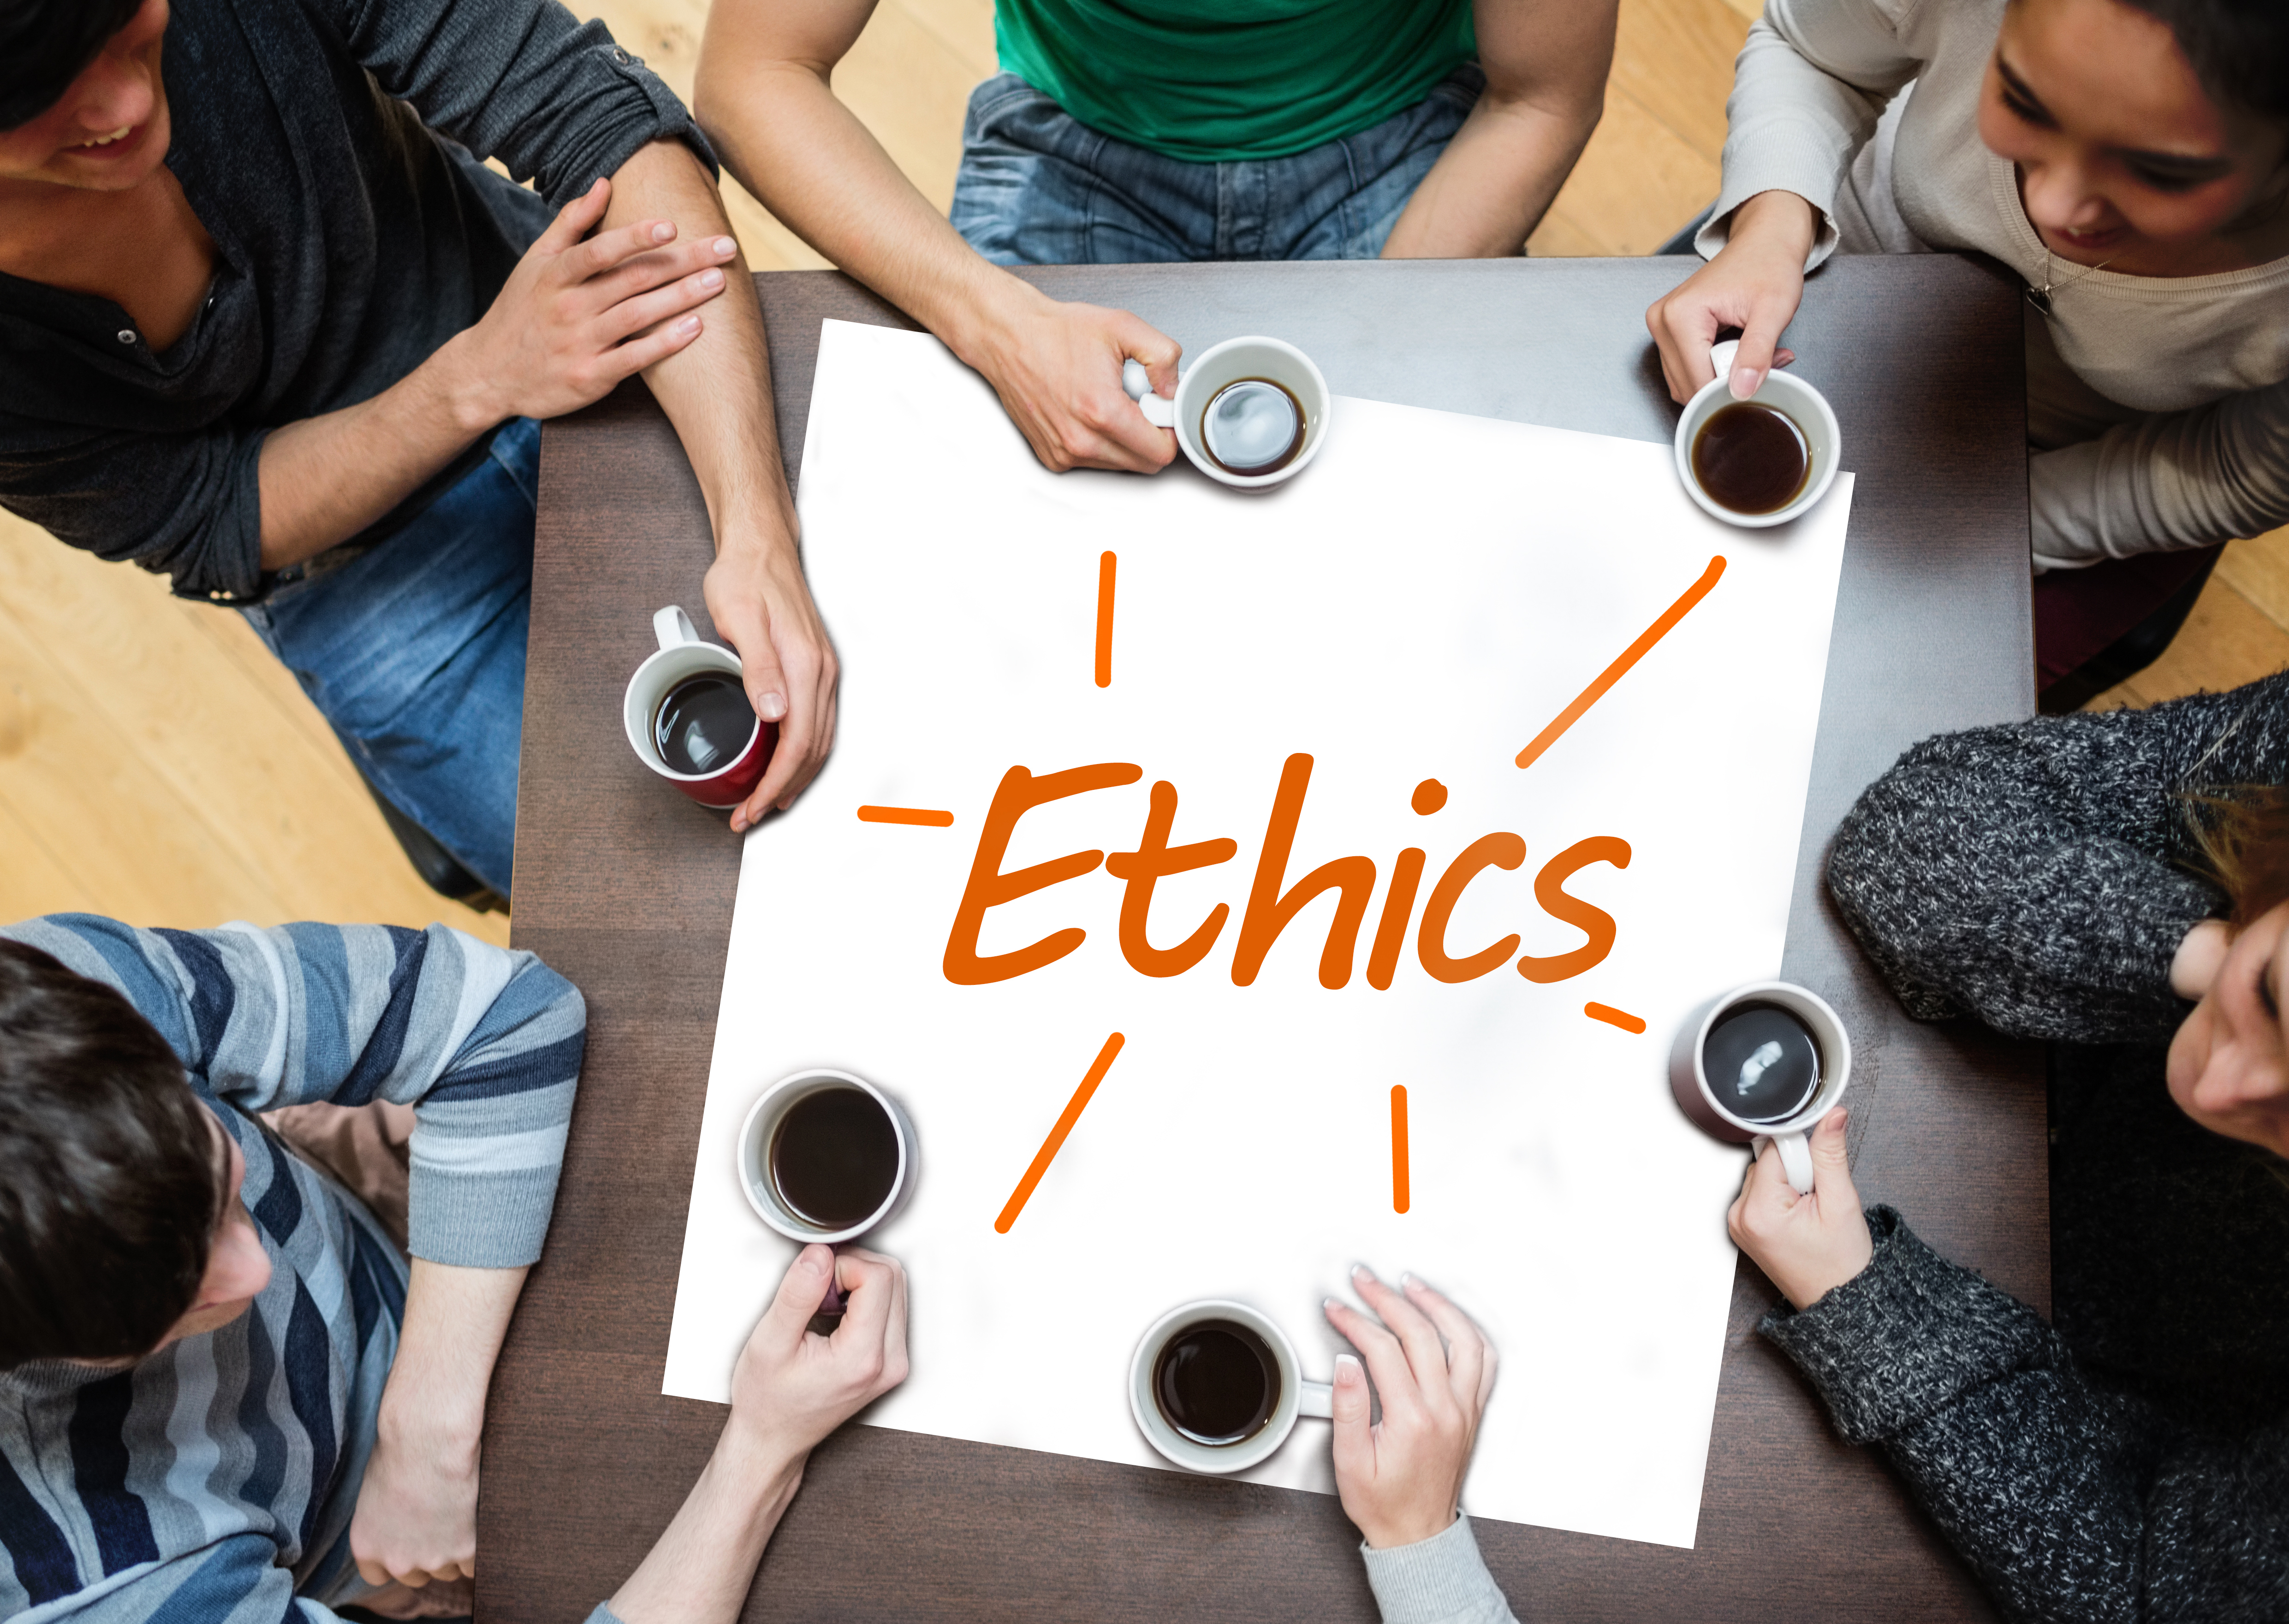 The Right Thing 101: Ethics in the Workplace